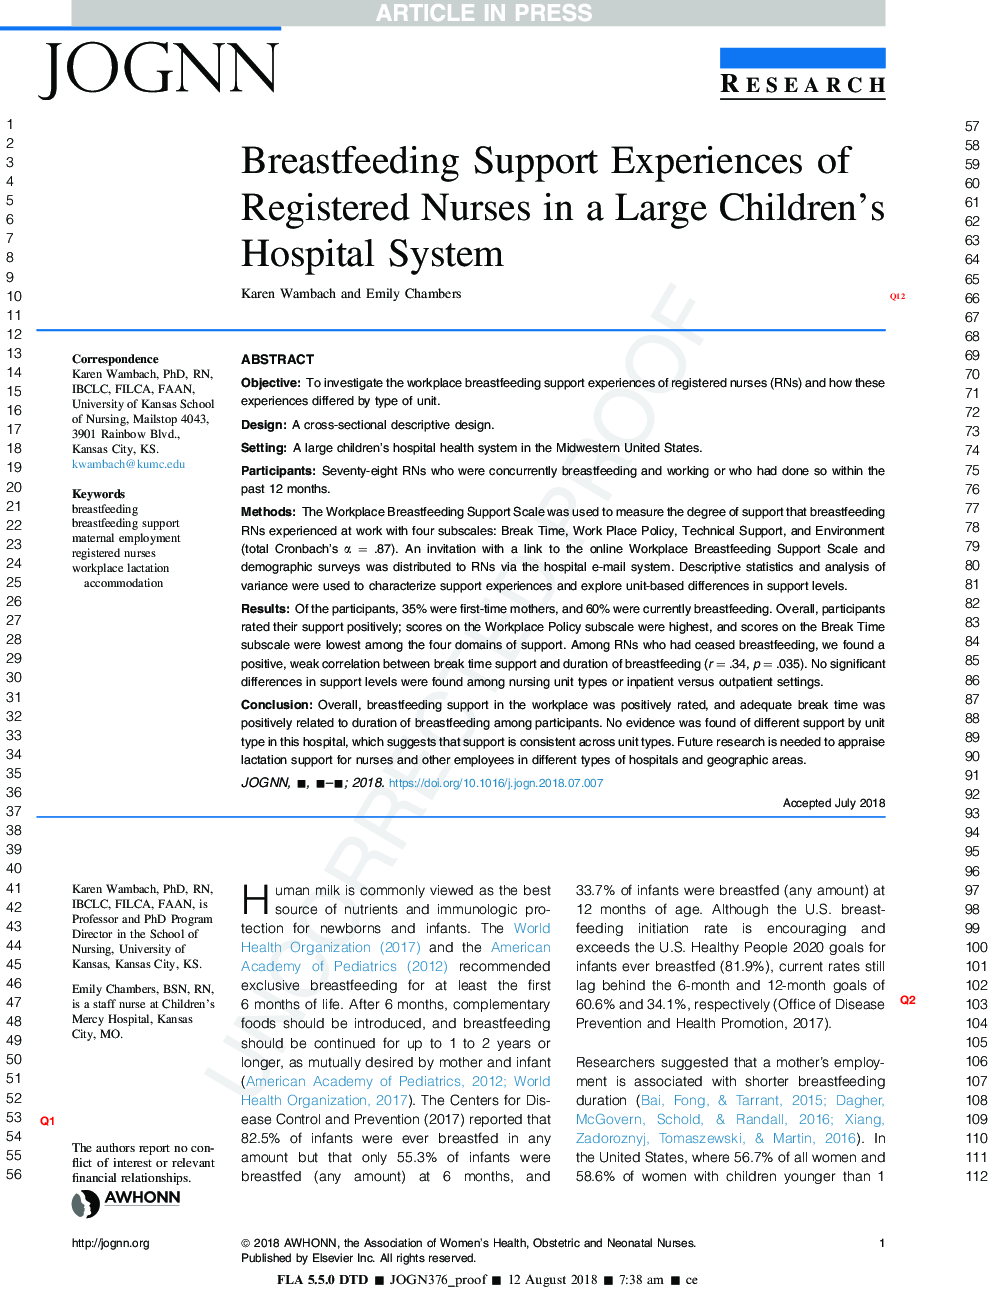 Breastfeeding Support Experiences of Registered Nurses in a Large Children's Hospital System